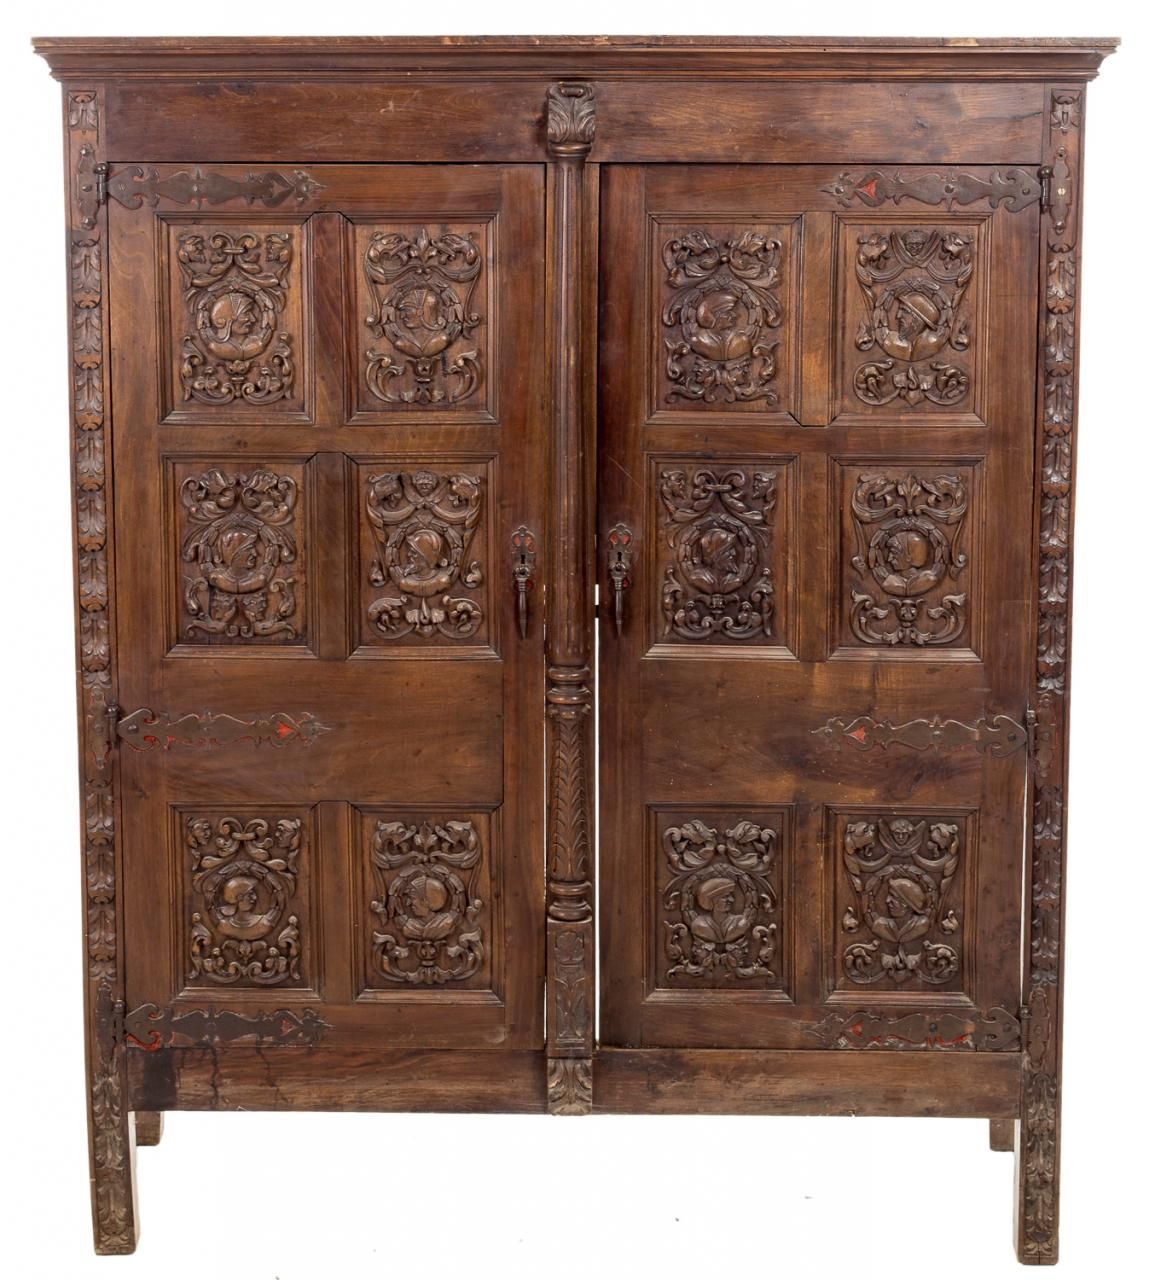 Null Renaissance style furniture in walnut decorated with vegetal motifs and ton&hellip;